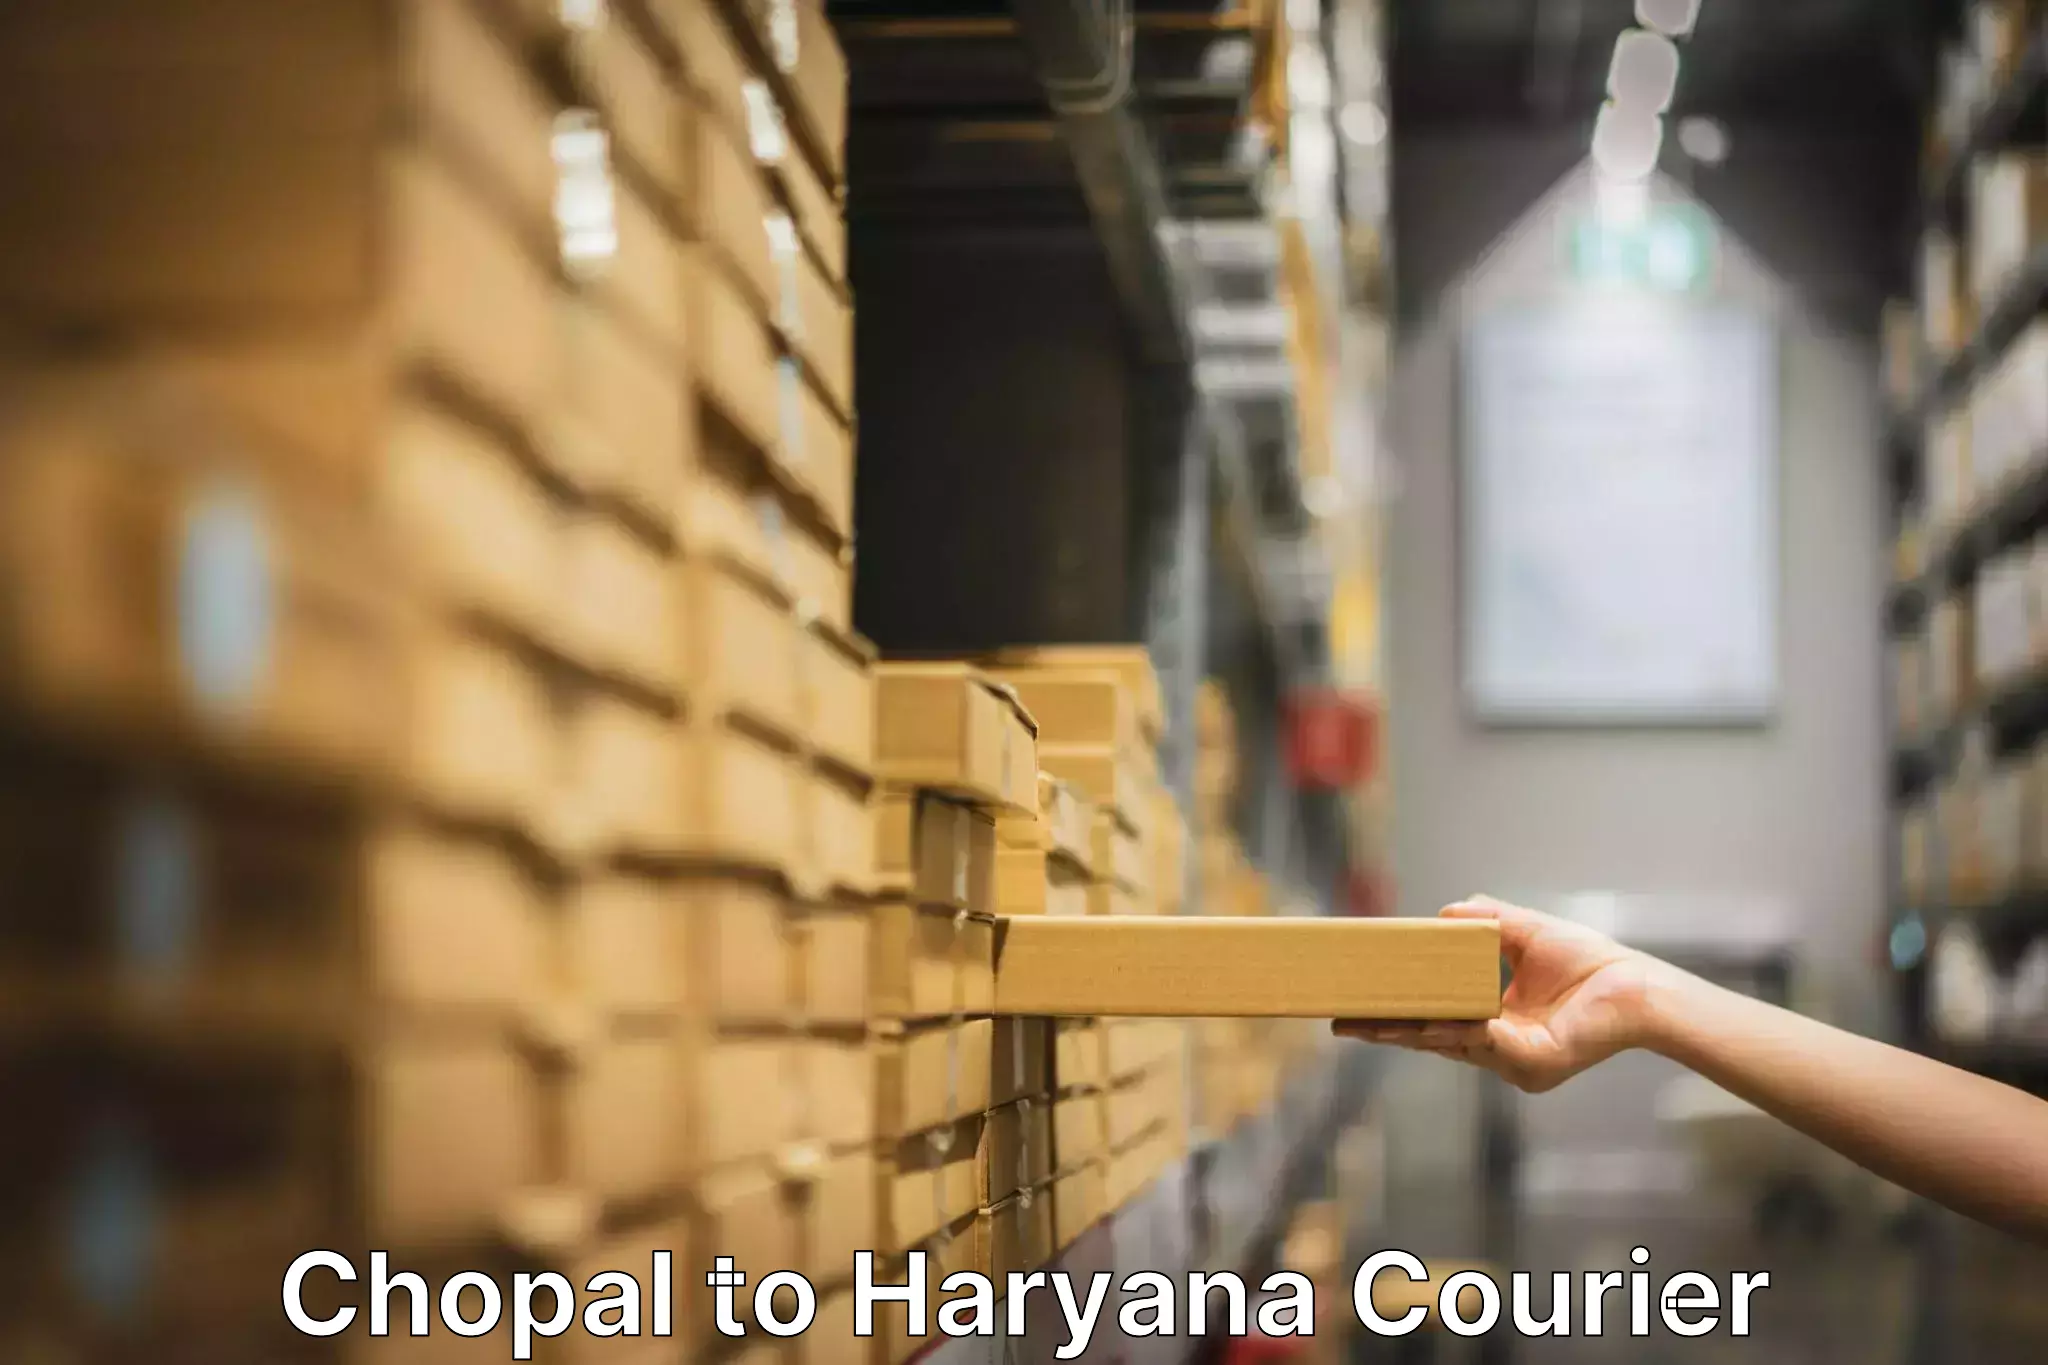 Quality relocation assistance Chopal to Bilaspur Haryana